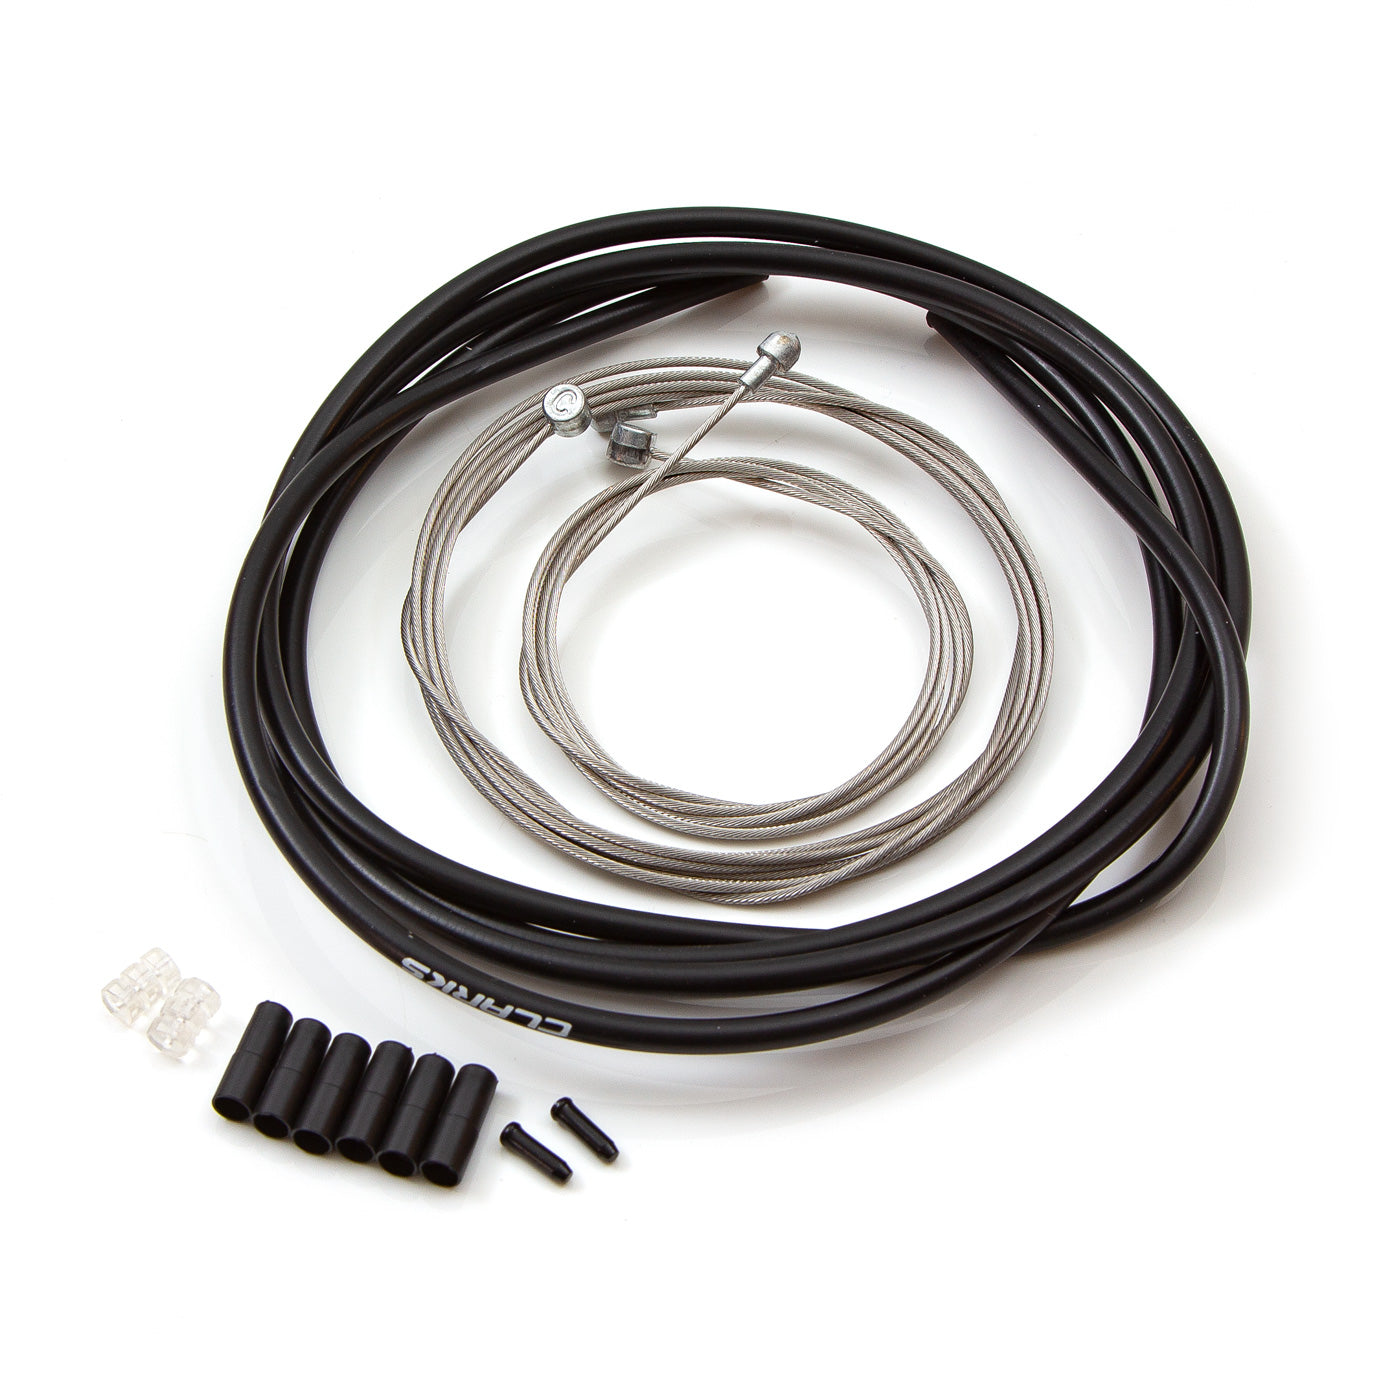 View Clarks Stainless Steel Brake Cable Kit Black information